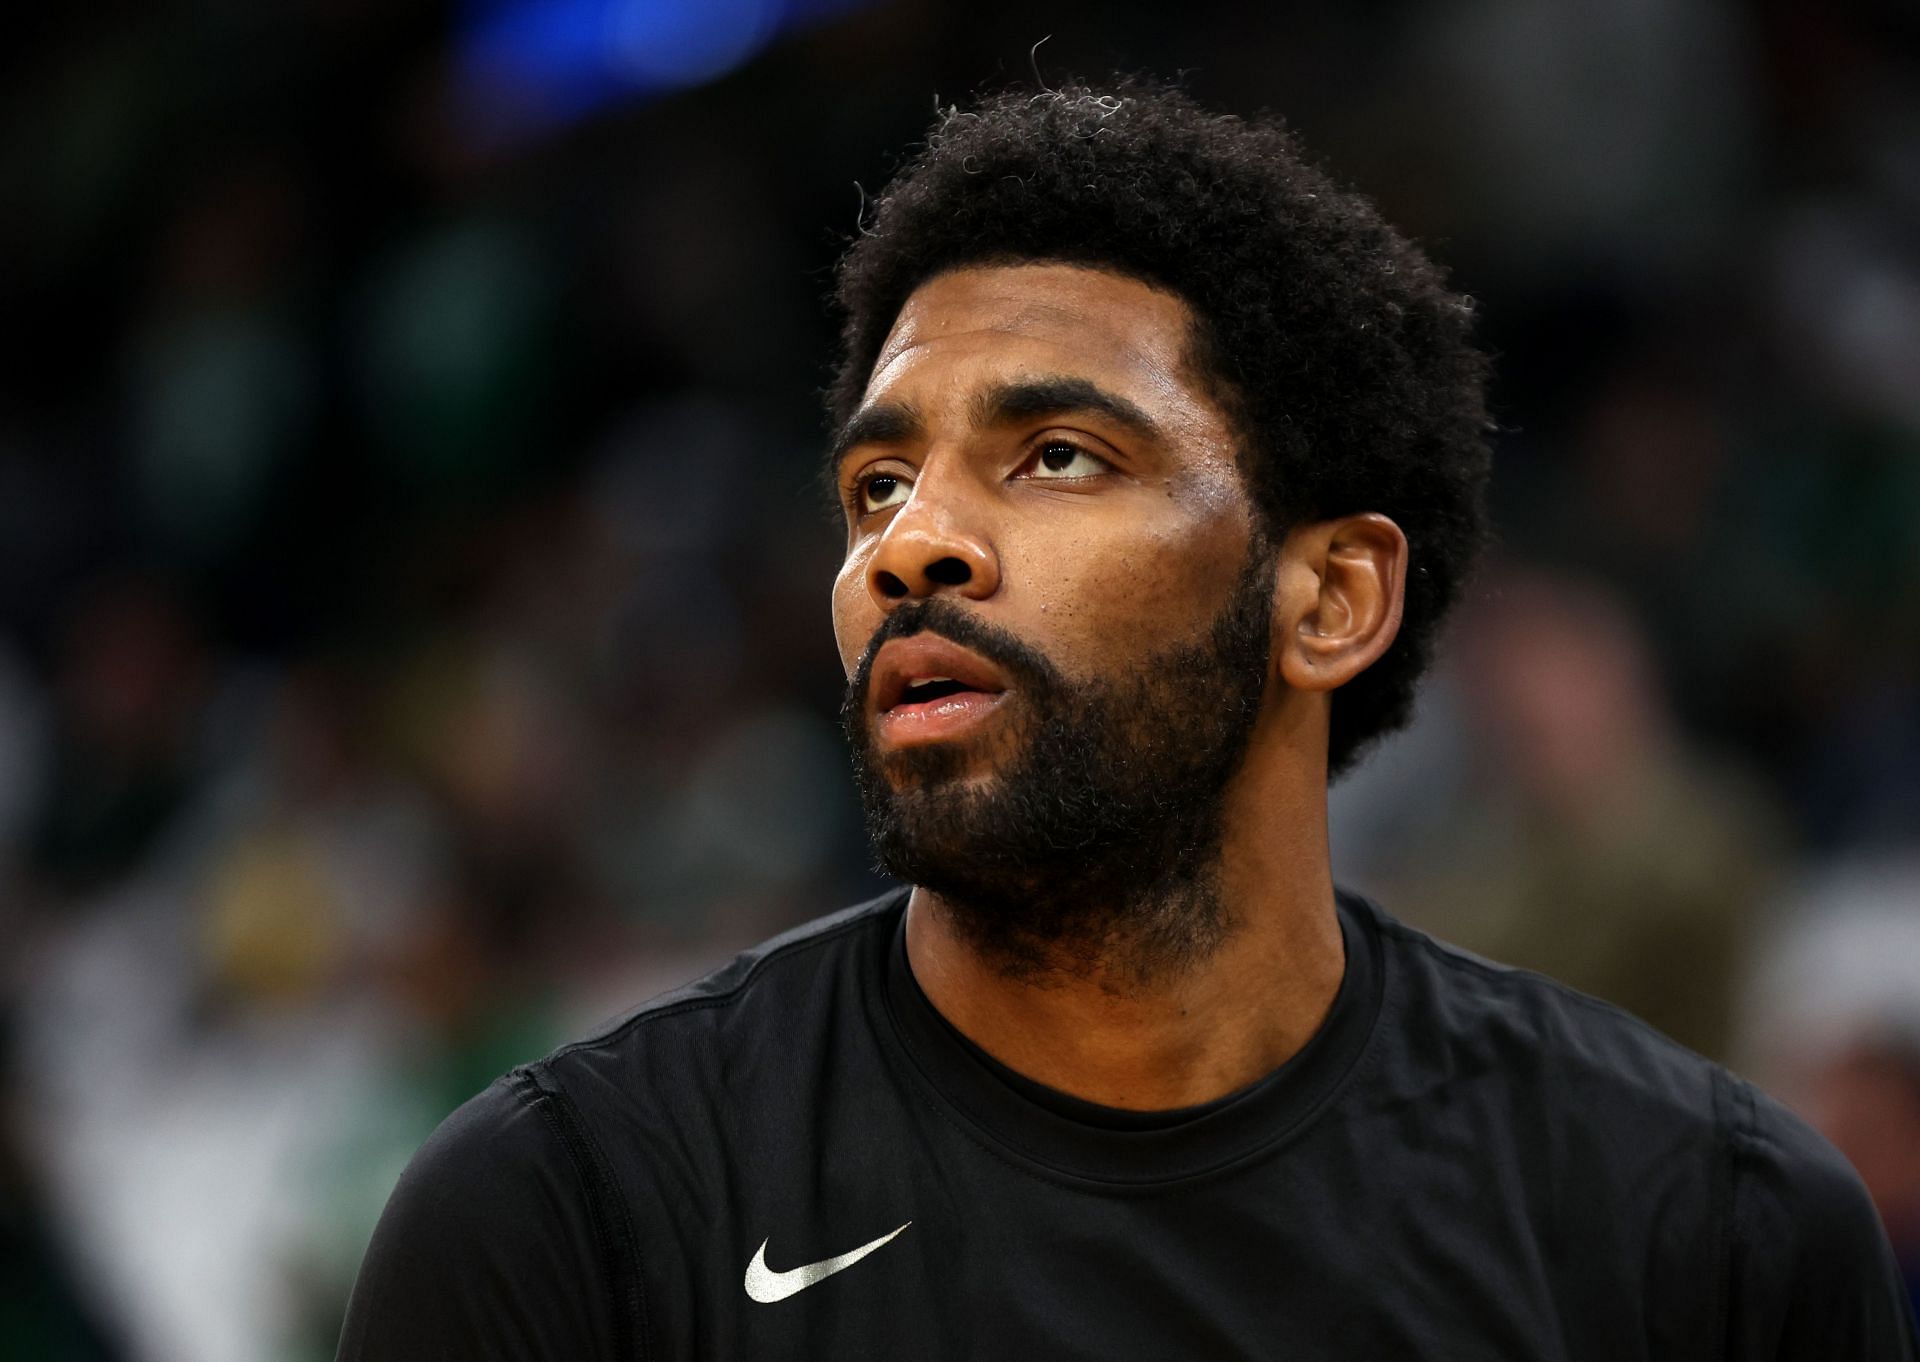 Kyrie Irving has expressed his desire to play for the Brooklyn Nets next season.